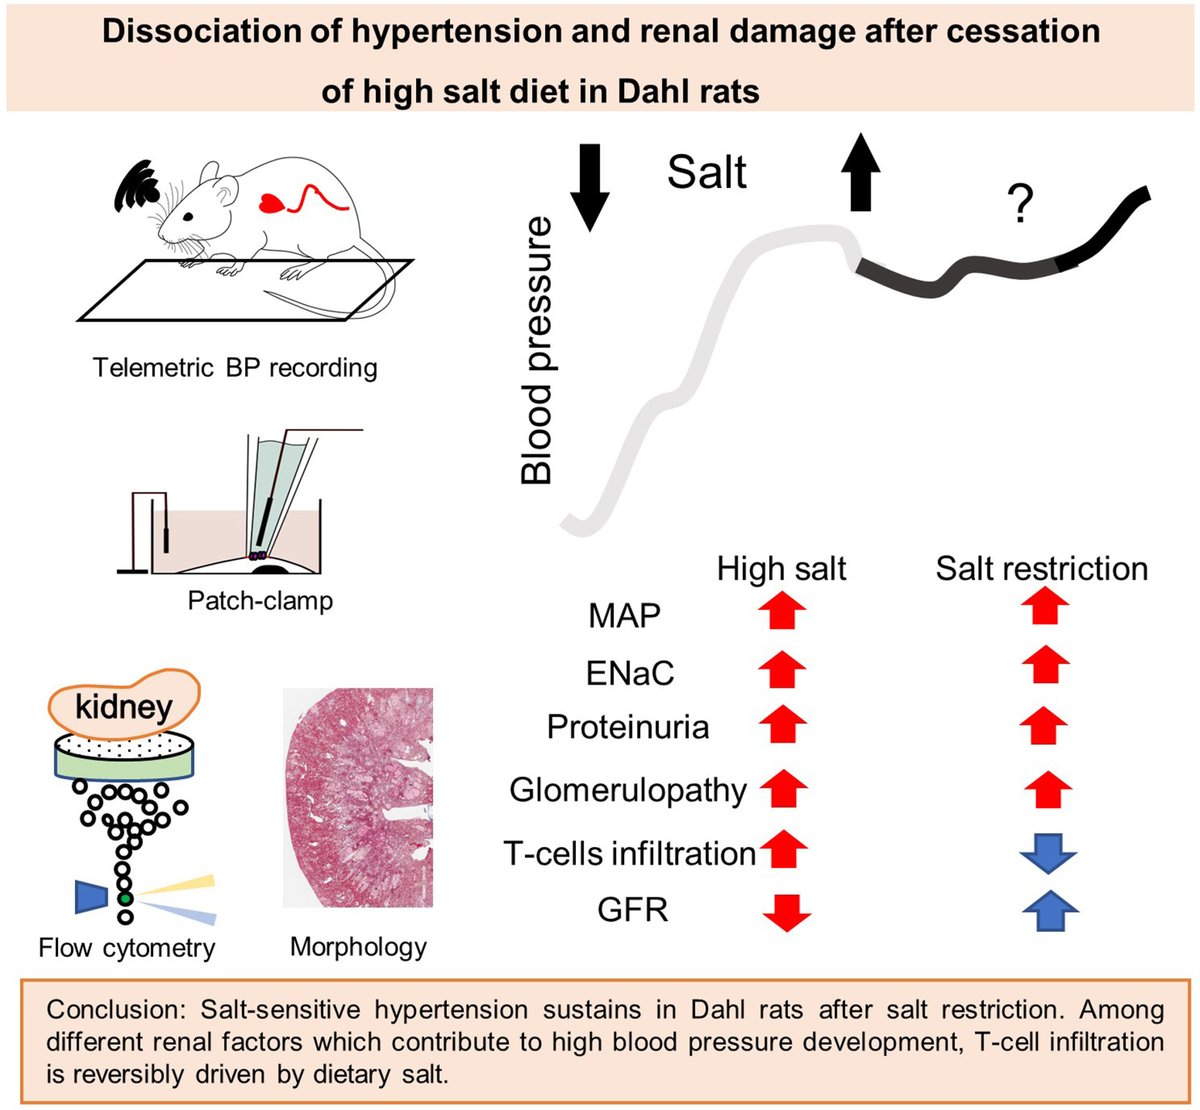 Every year, thousands of hypertensive patients reduce salt consumption per doctor's recommendation. However, blood pressure remains high in many of them. Arkhipov et al explore mechanisms of the weak res... #KidneyInCVD @SrgArk @313kidney @CardiorenalRese ahajrnls.org/3R6cDK9